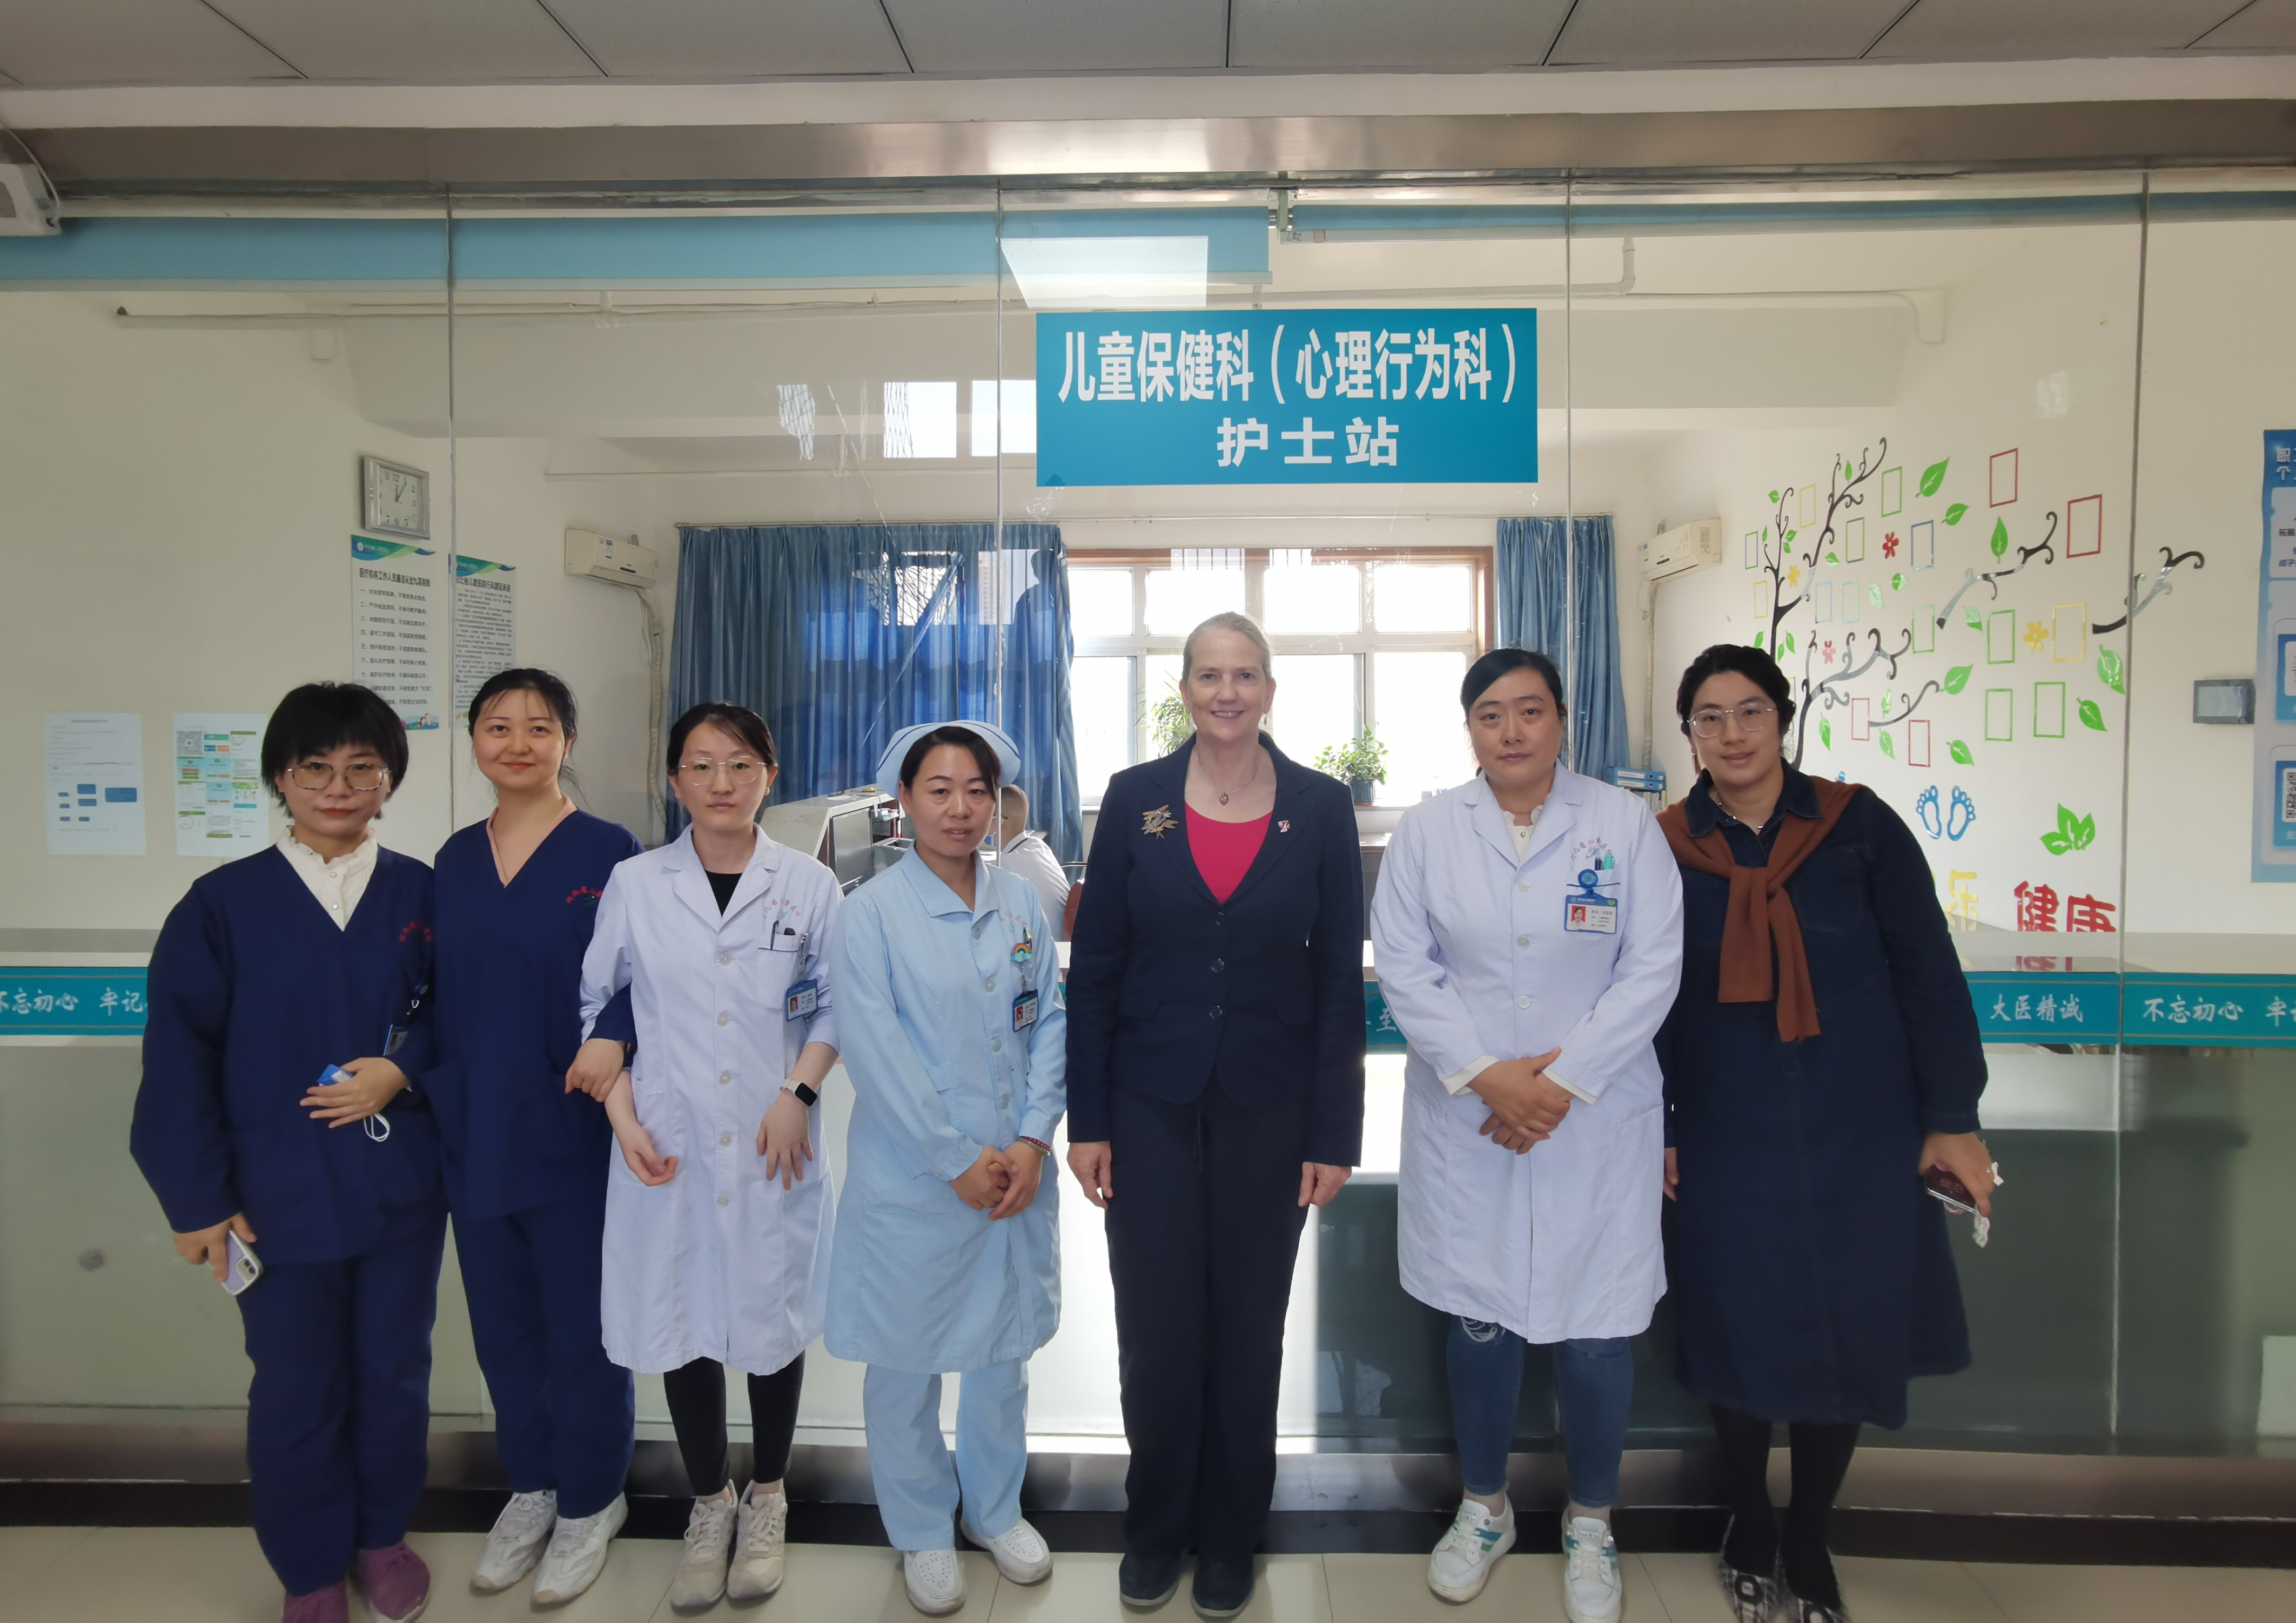 Our centre director is pictured with other medical professionals in the hospital in China.